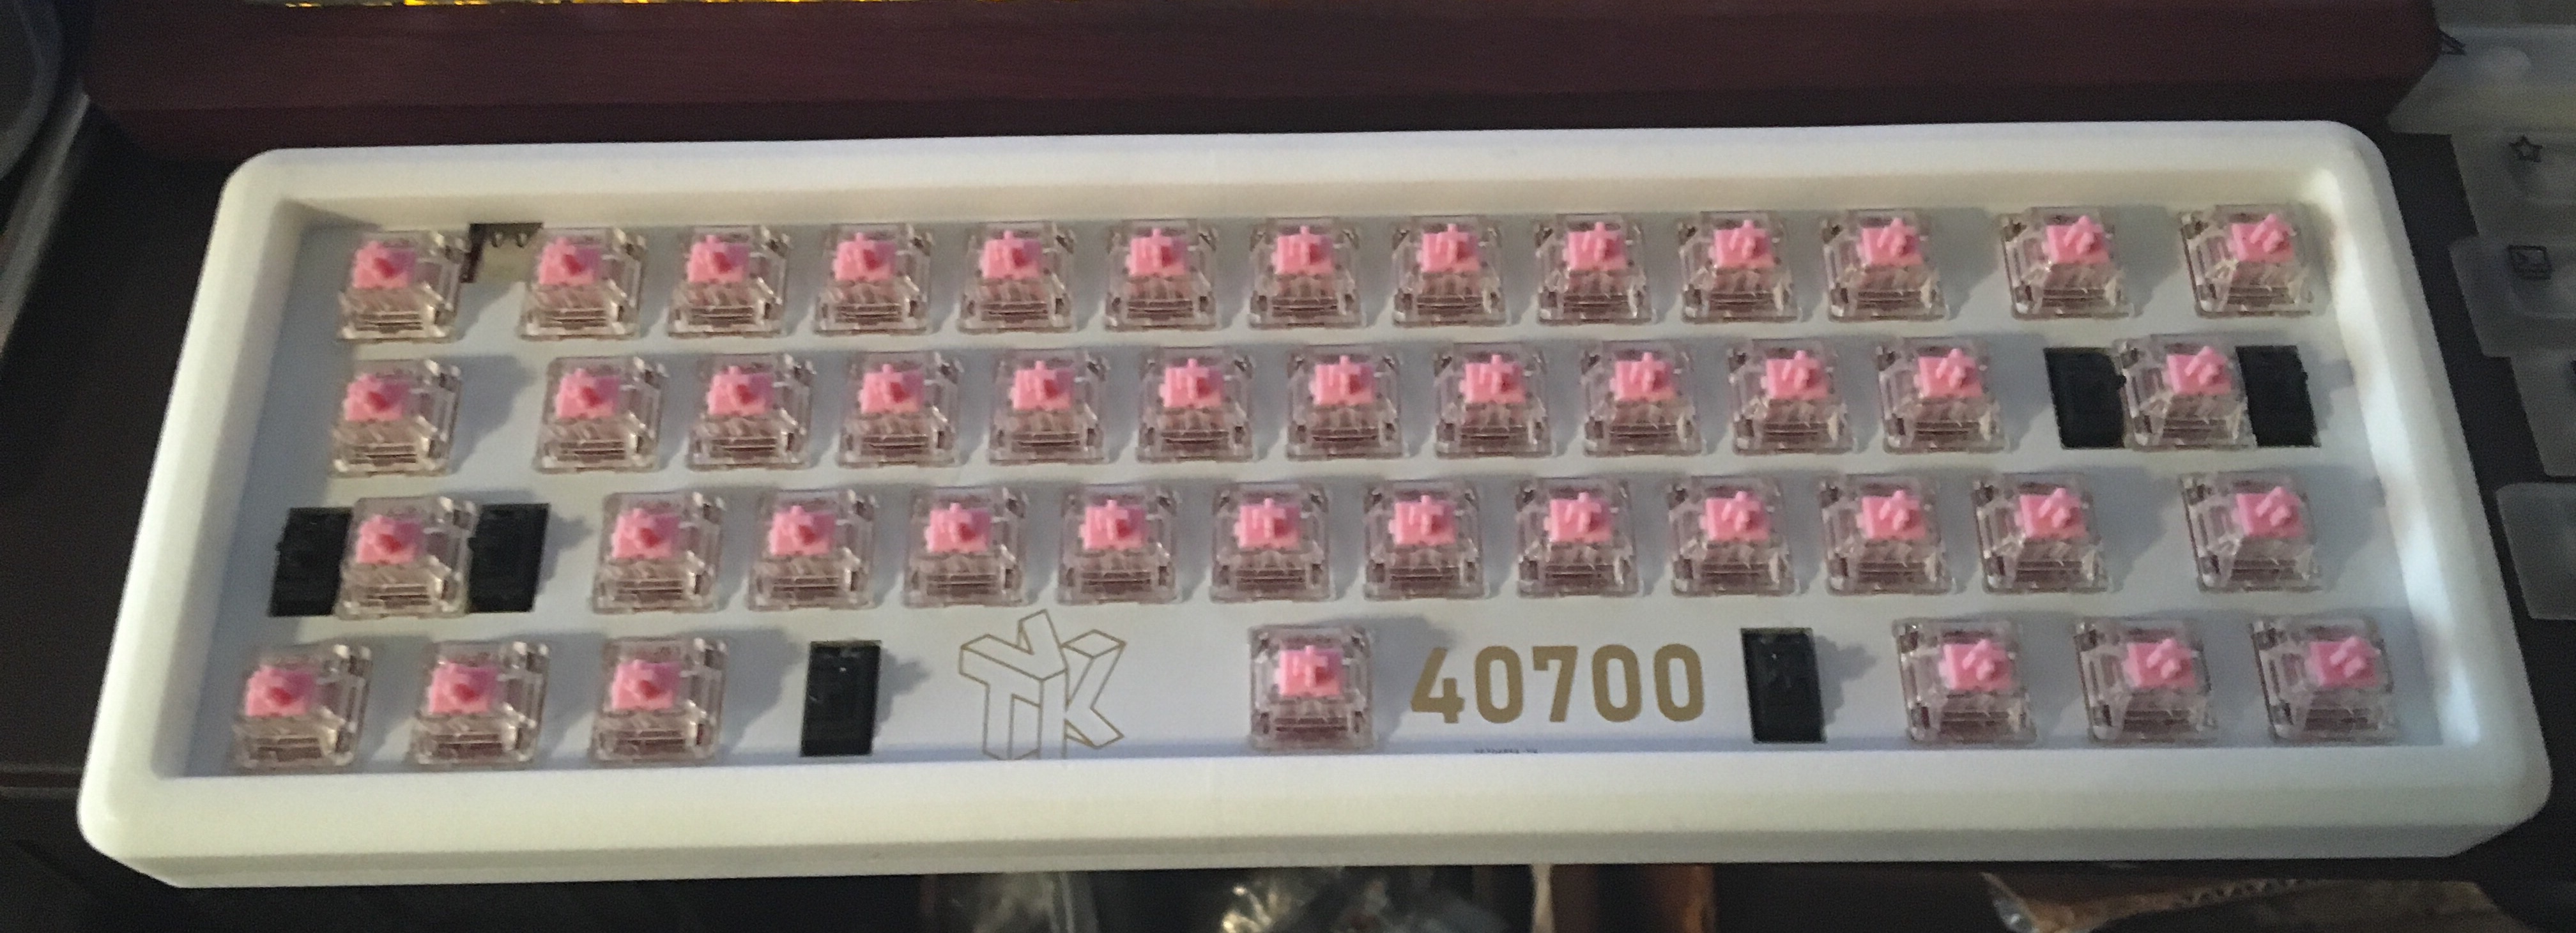 40700 without keycaps